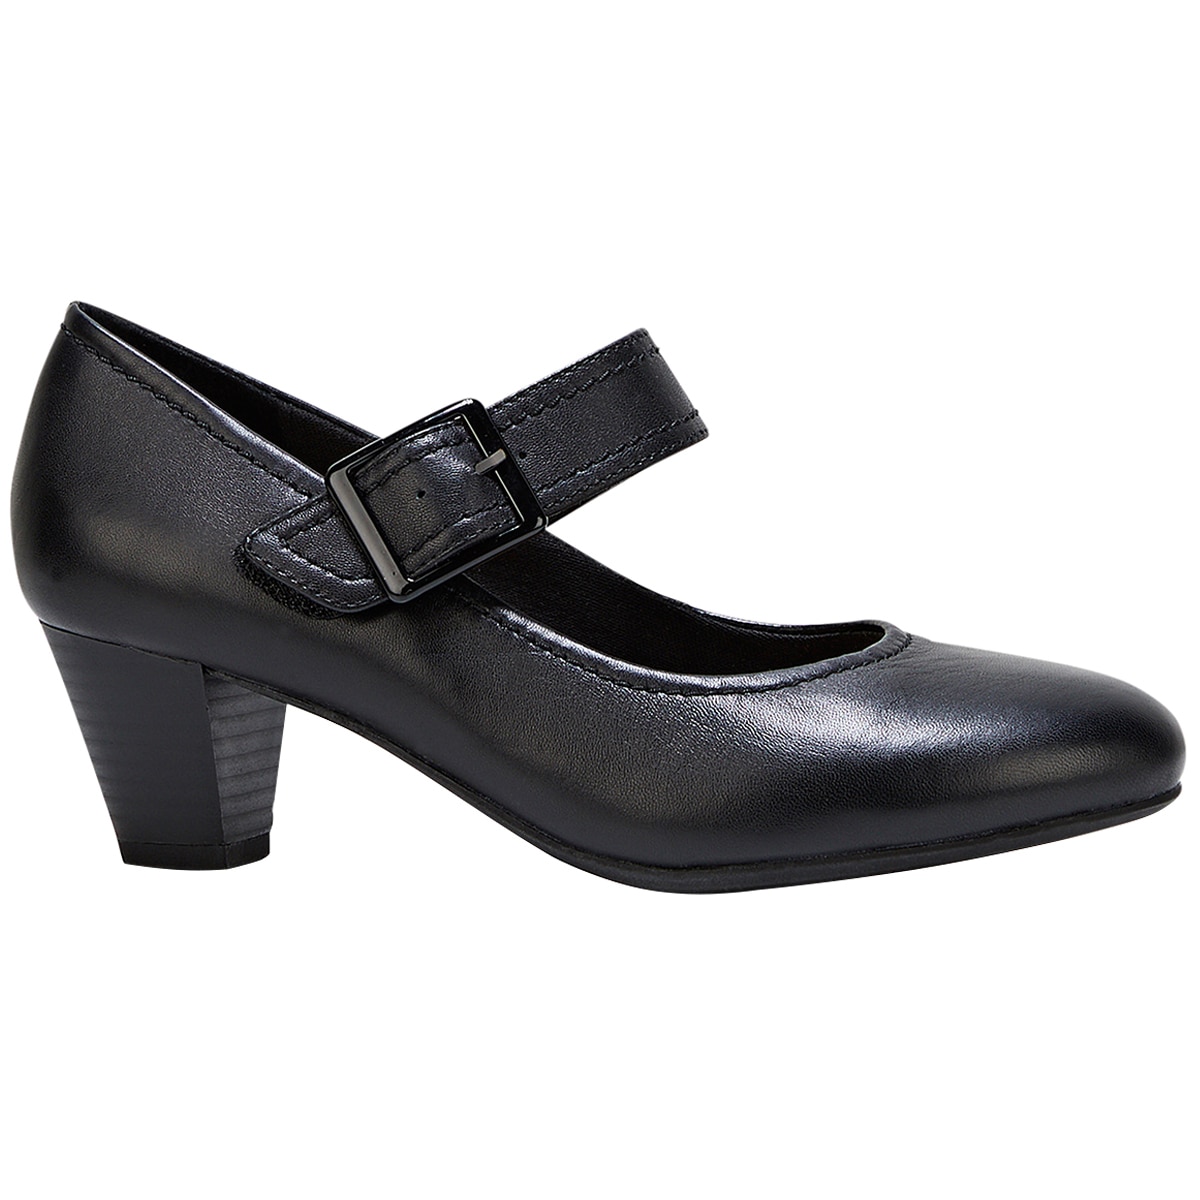 hush puppies extra wide womens shoes